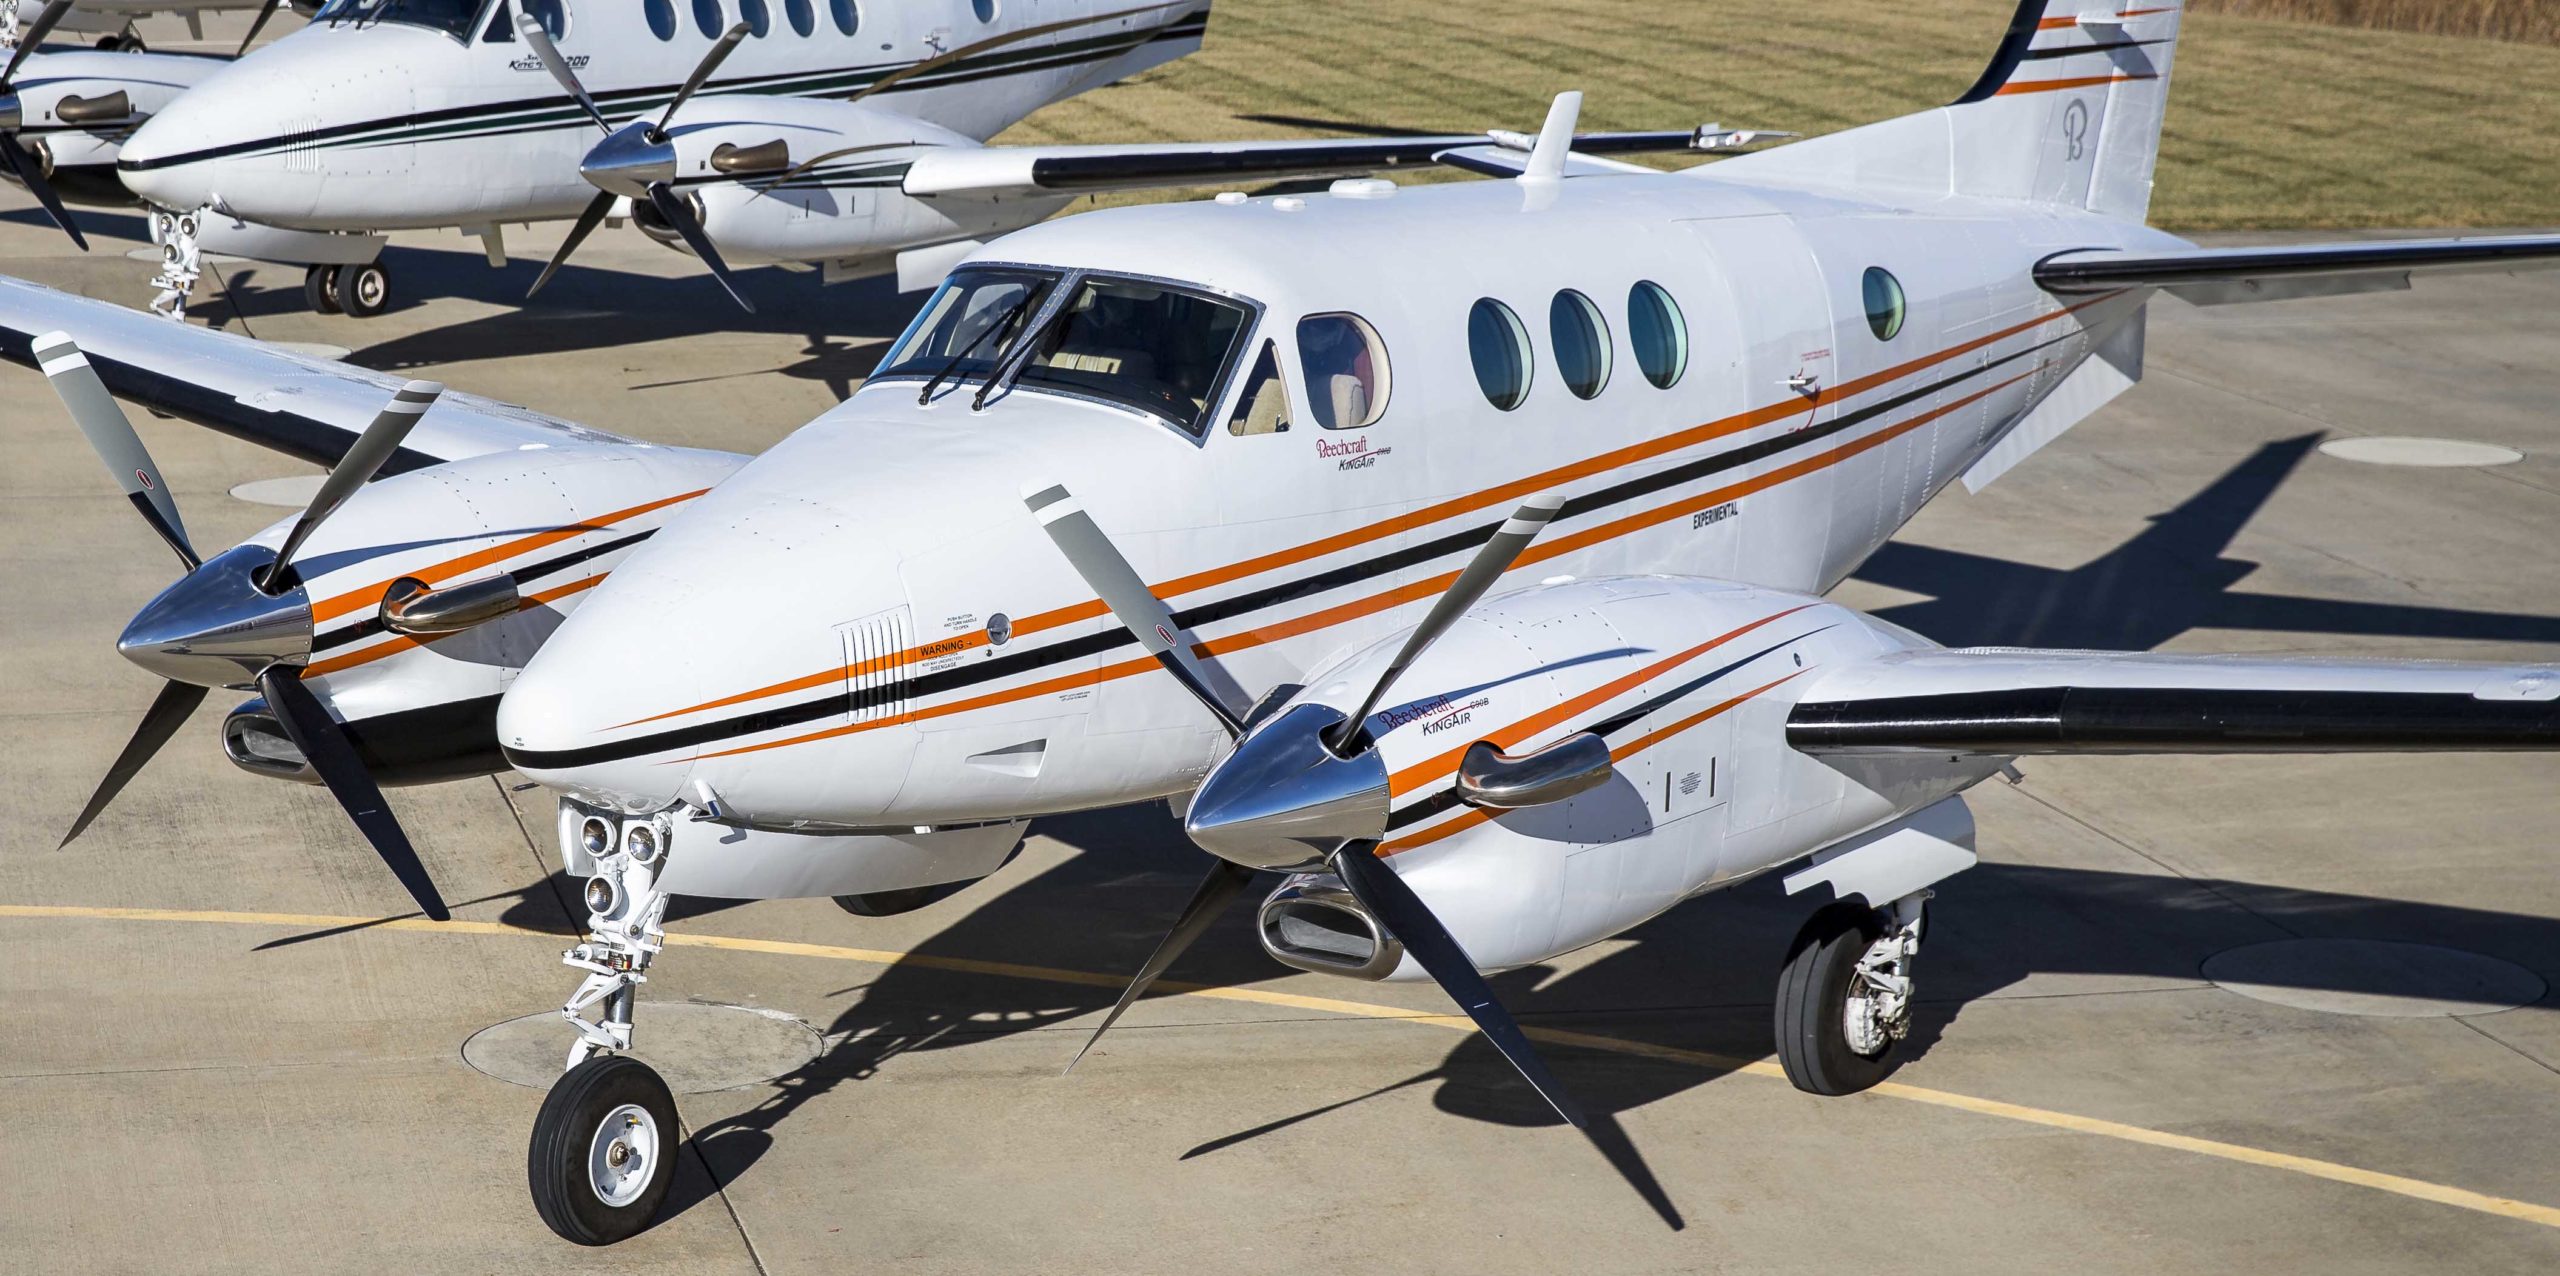 King Air aircraft parked on a taxiway ramp